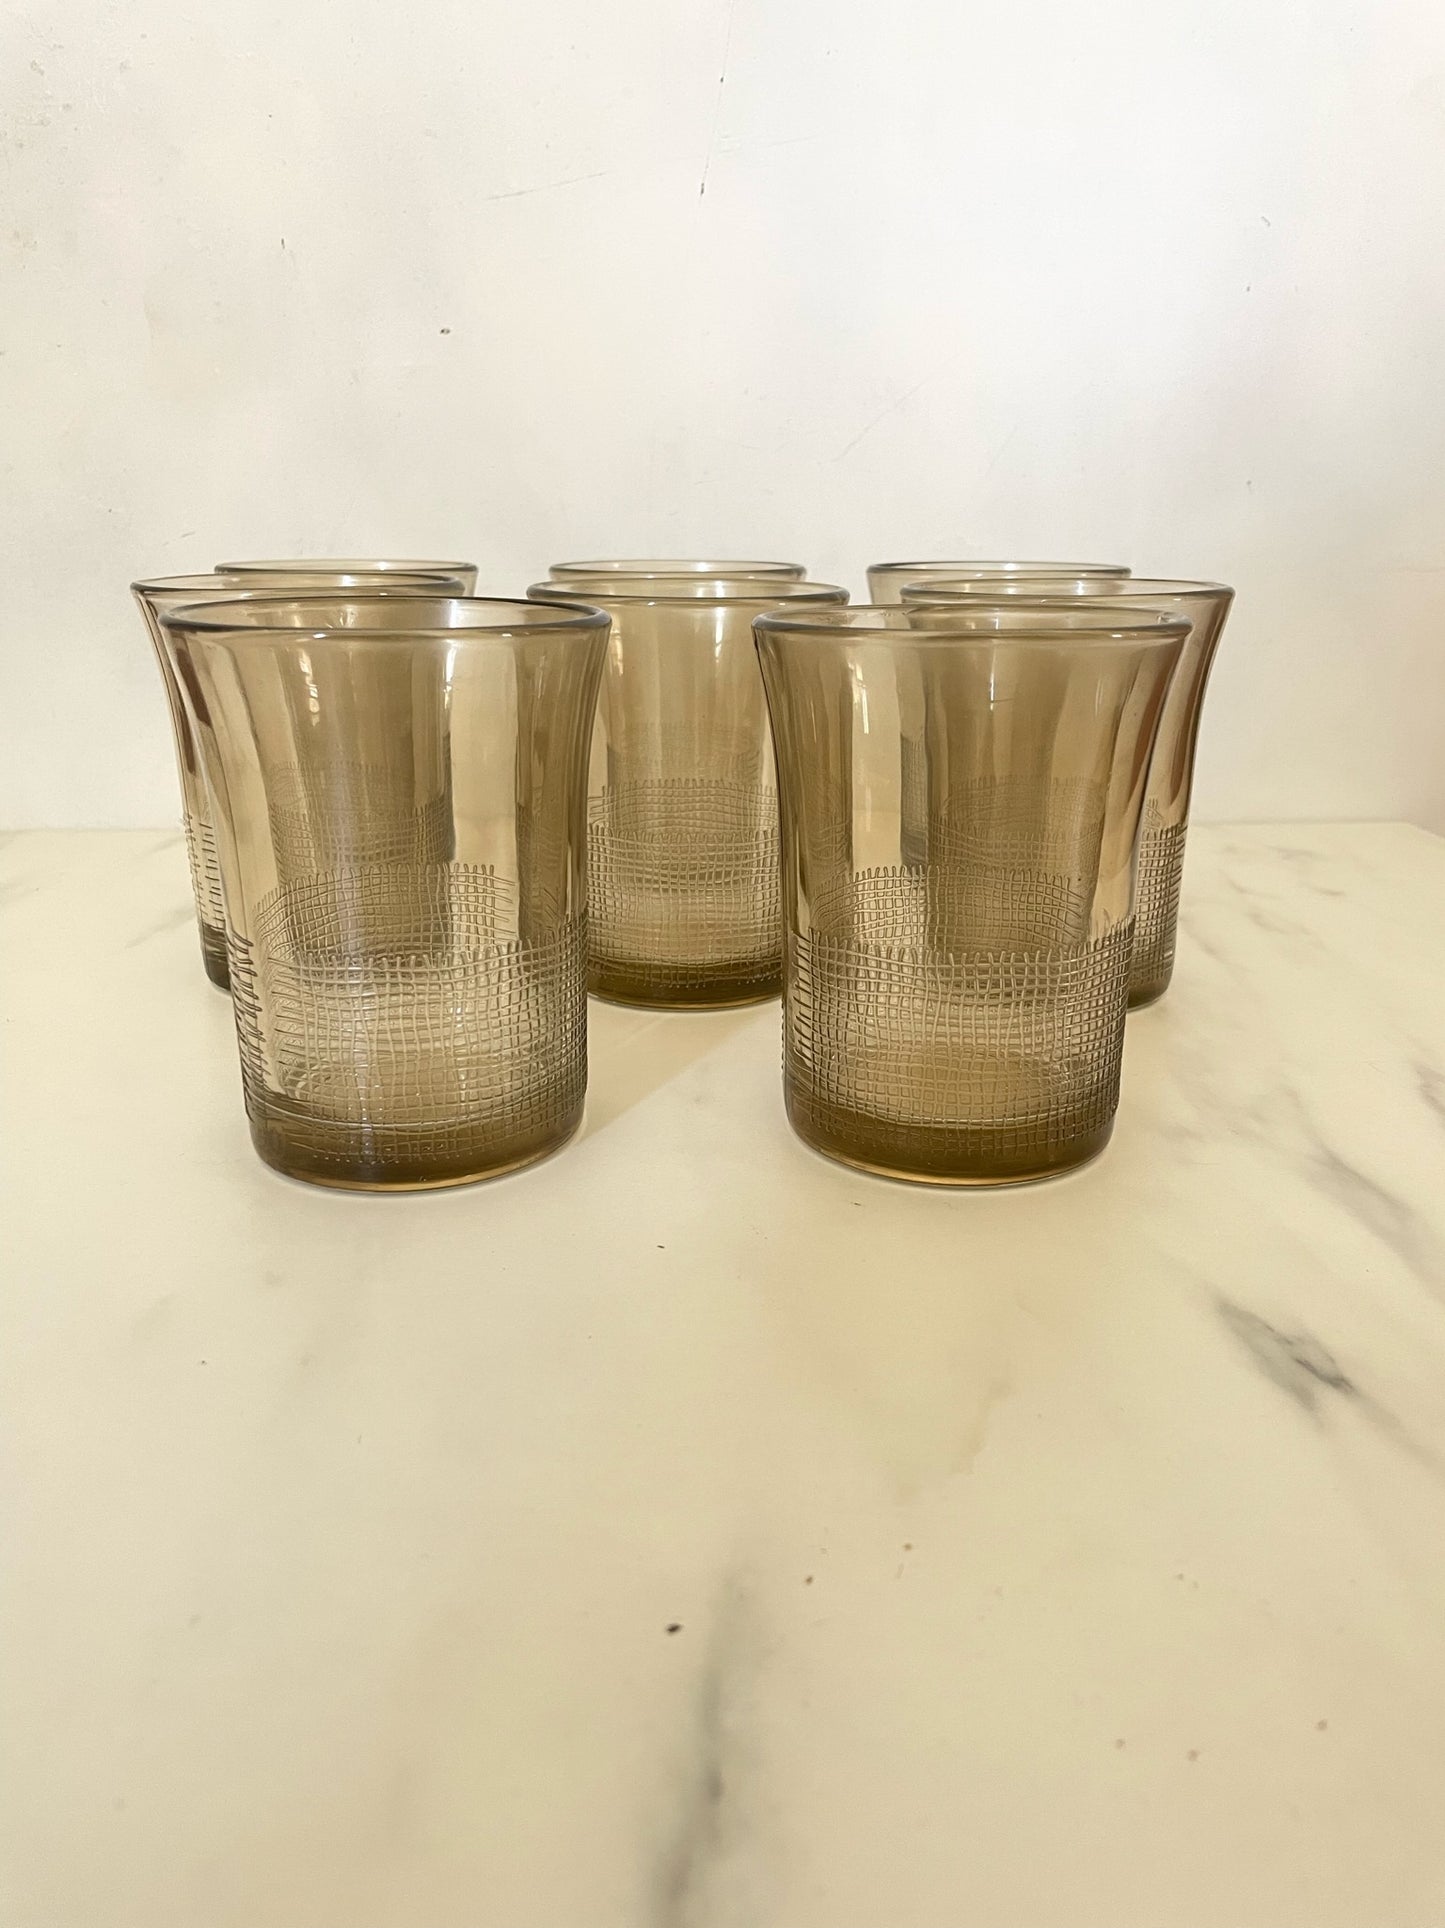 Vintage Brown Woven Texture Tumbler Glasses by Crisa  - set of 8